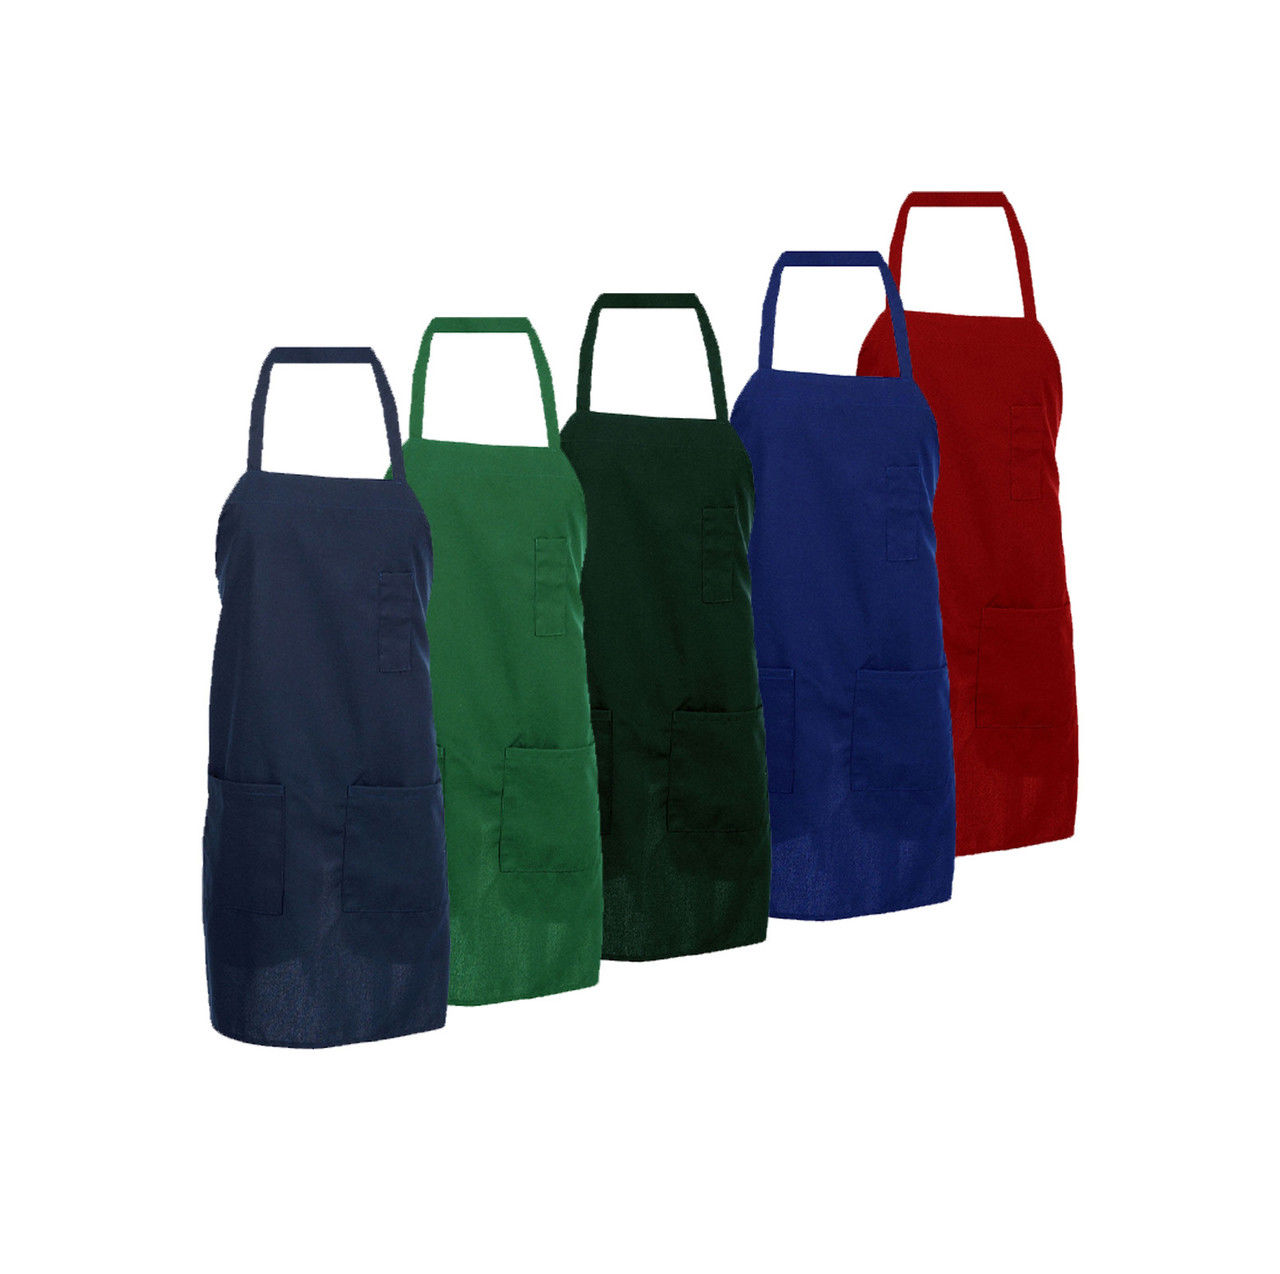 In how many colors is the braid bib 3-Pocket Apron with Tubular Braid Ties available?